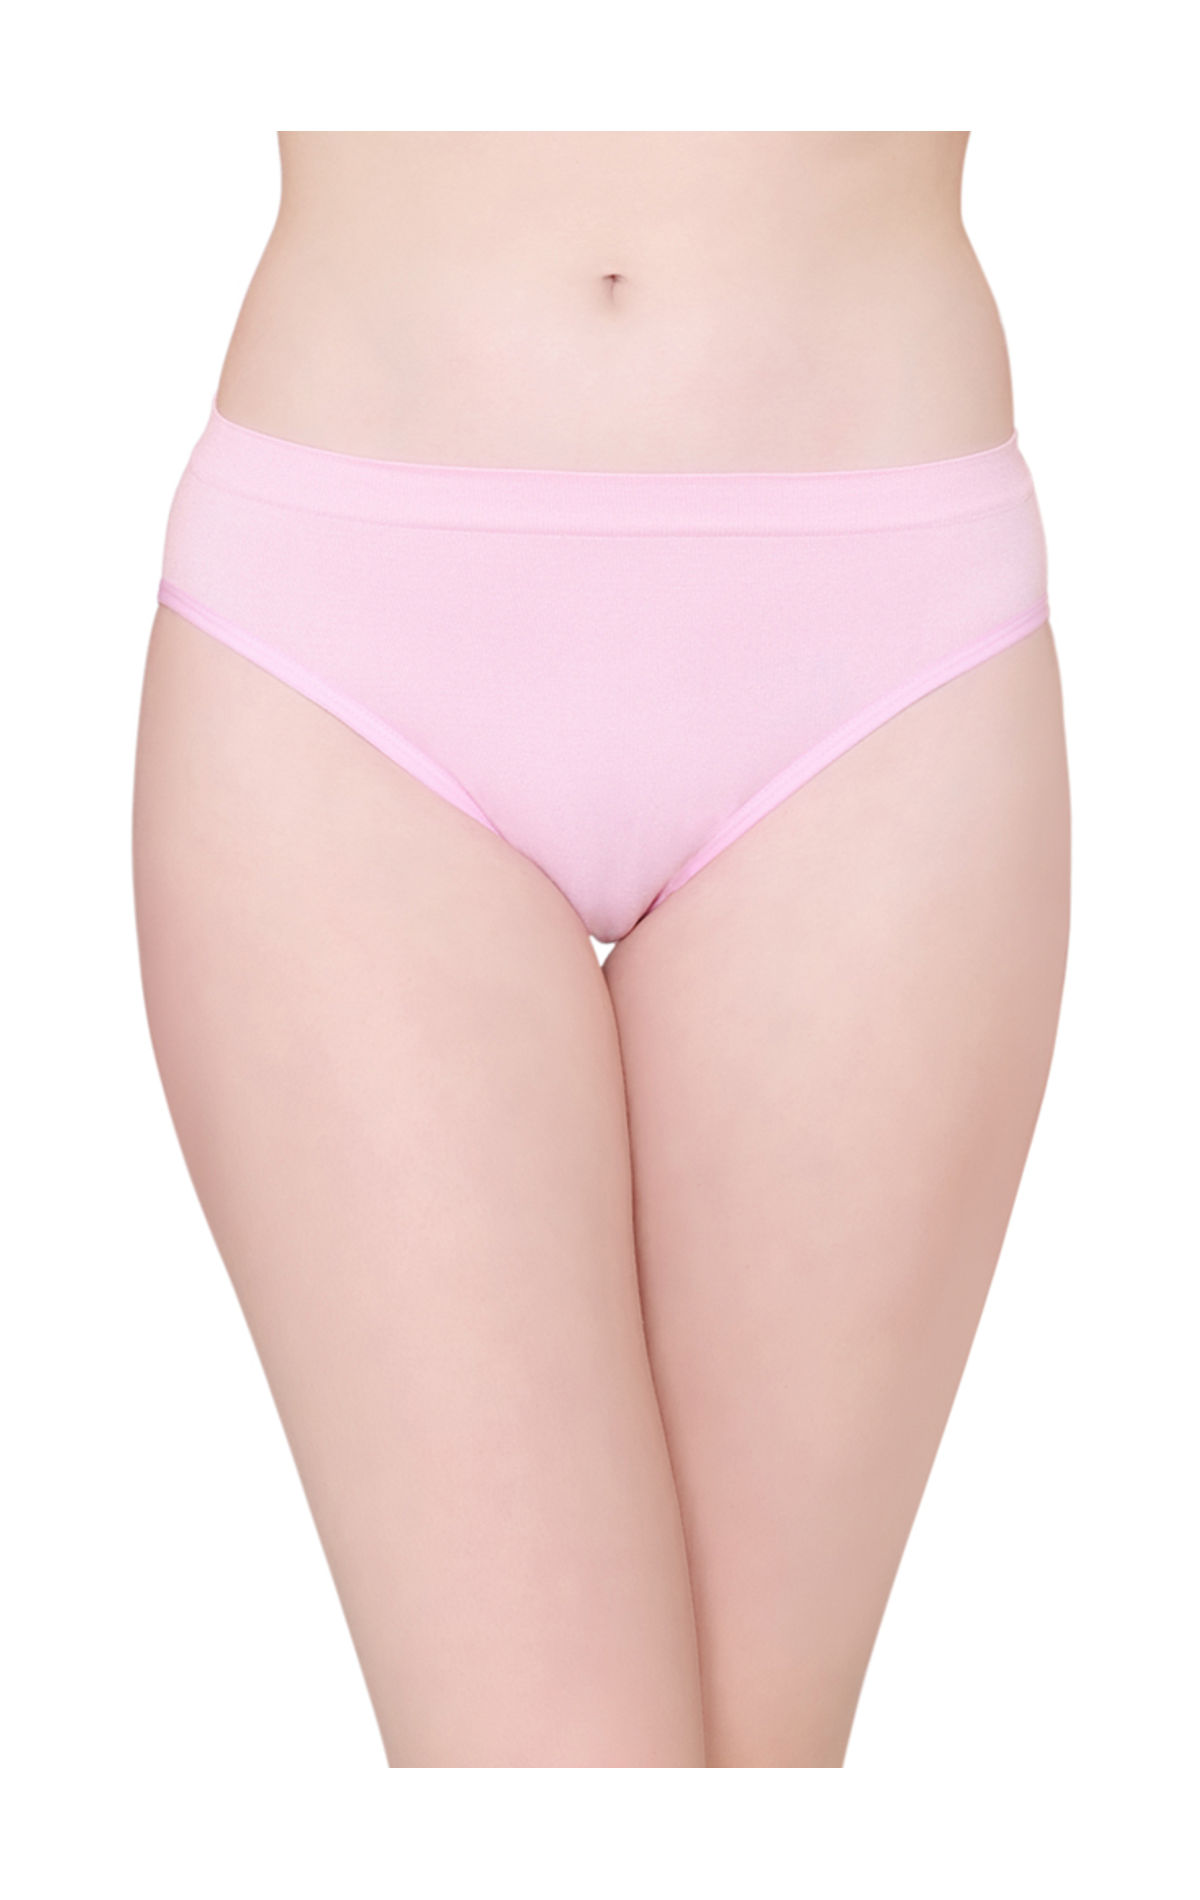 Pack of 2 Seamless Briefs in Microfibre for Maternity - pink light solid